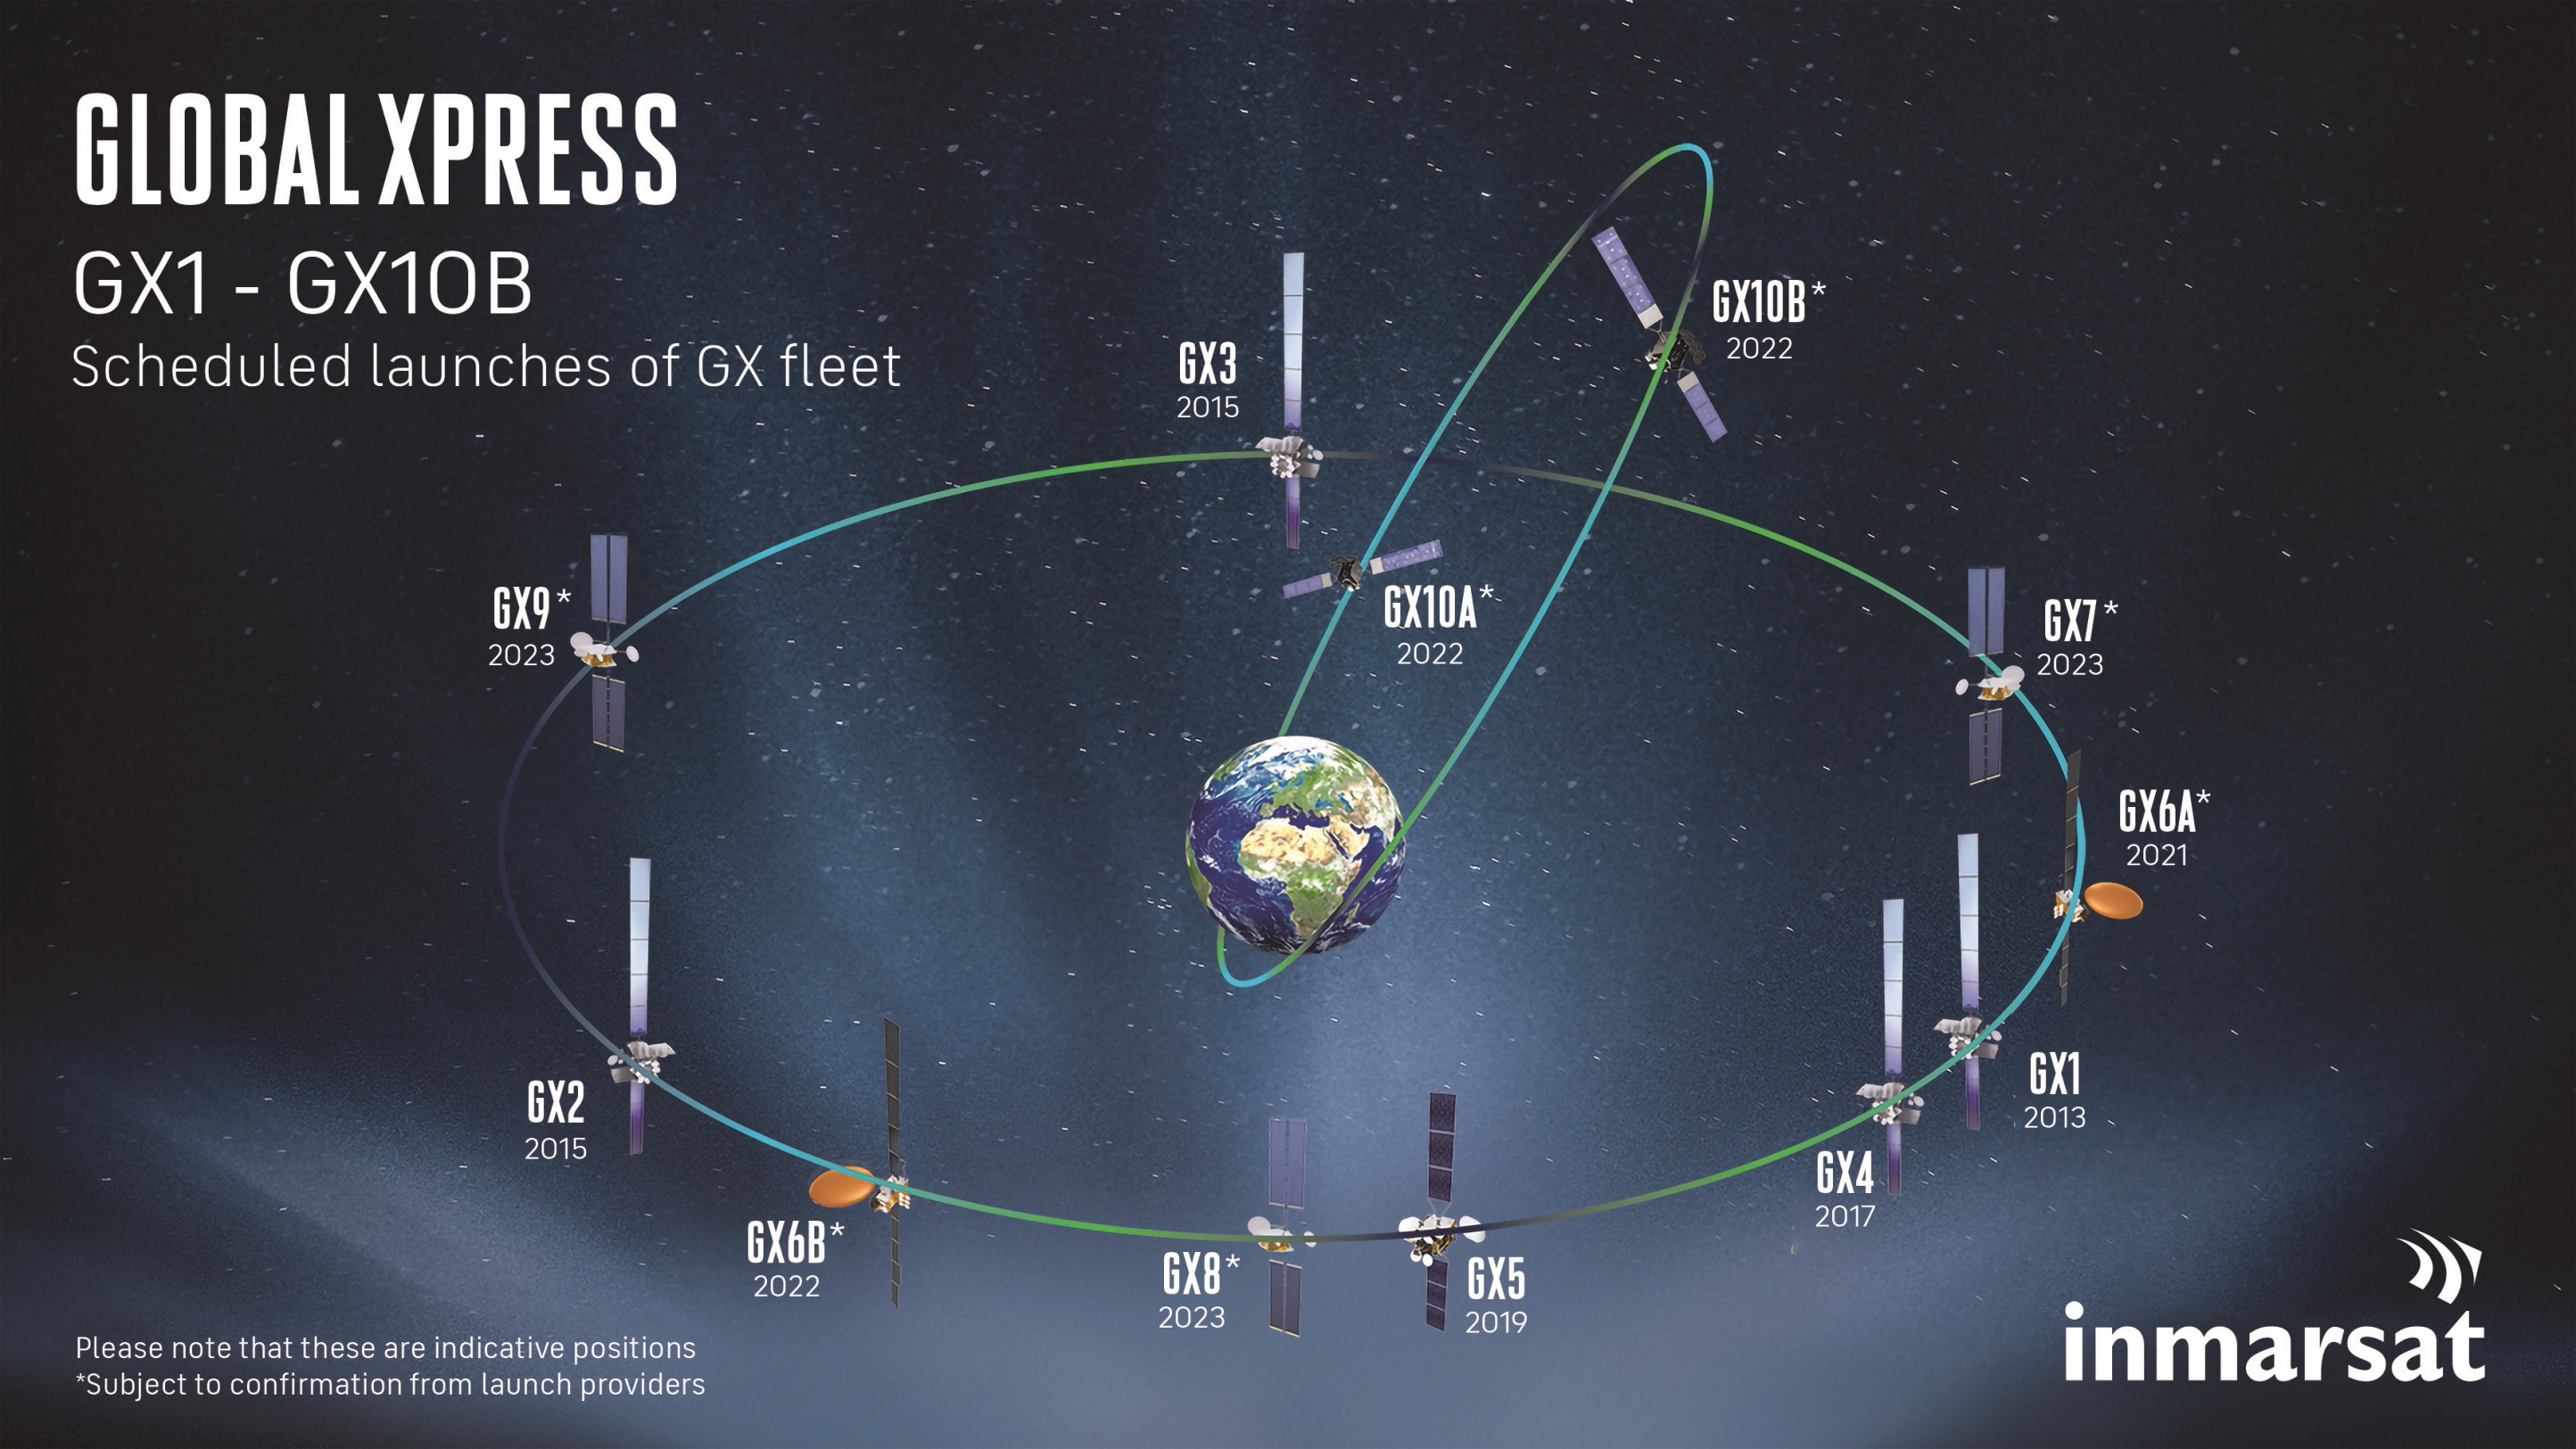 GX5 is the 14th satellite currently in service with Inmarsat. Seven further launches are scheduled by 2024: five in geostationary orbit - adding speed, capacity and resilience - and two in highly elliptical orbit. Click to enlarge.